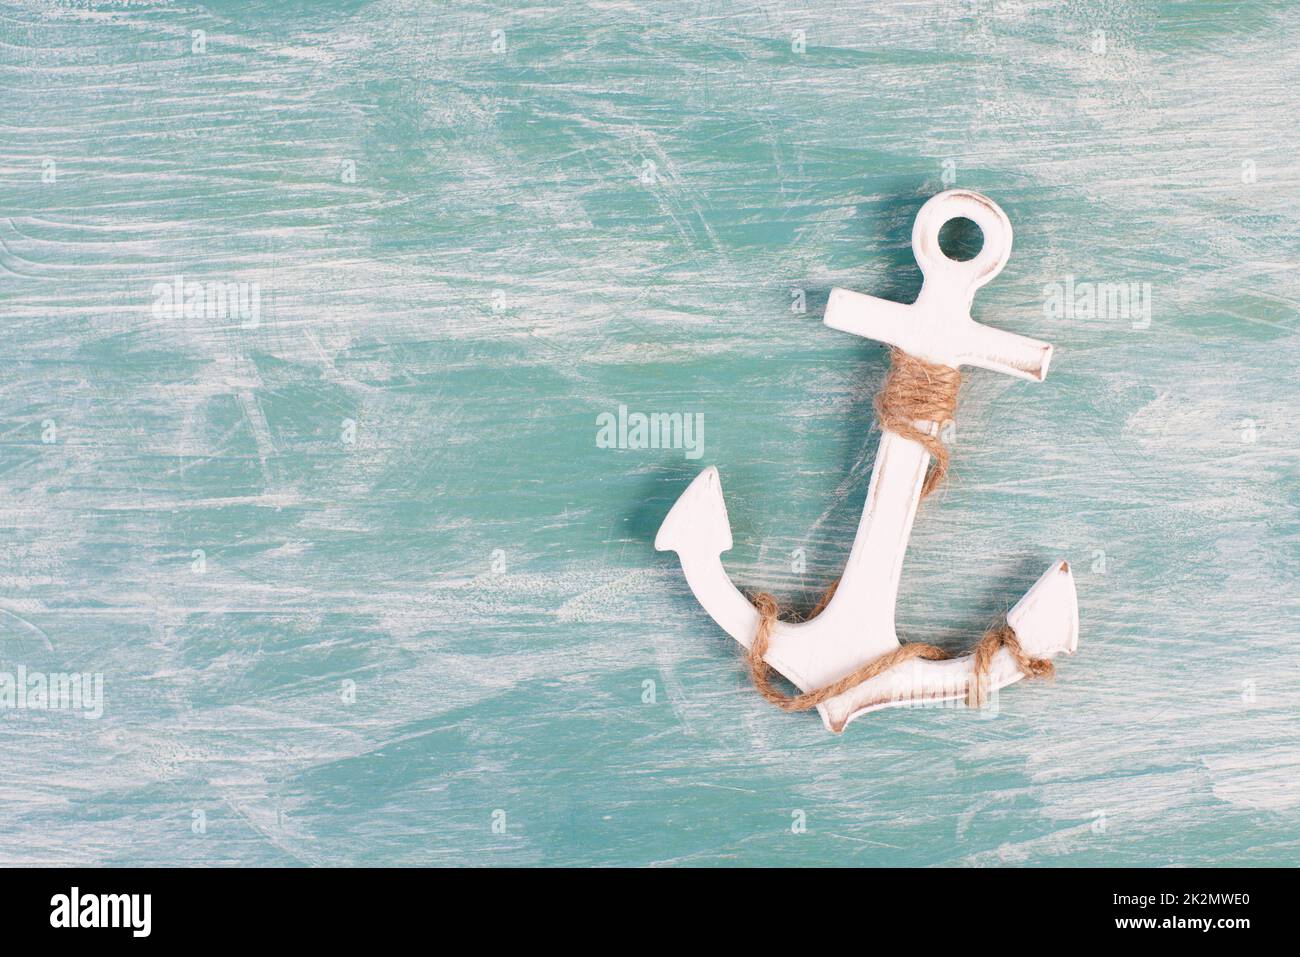 White anchor on a blue textured background, maritime sea life, sailing trip, summer vacation, tourism concept, harbor Stock Photo